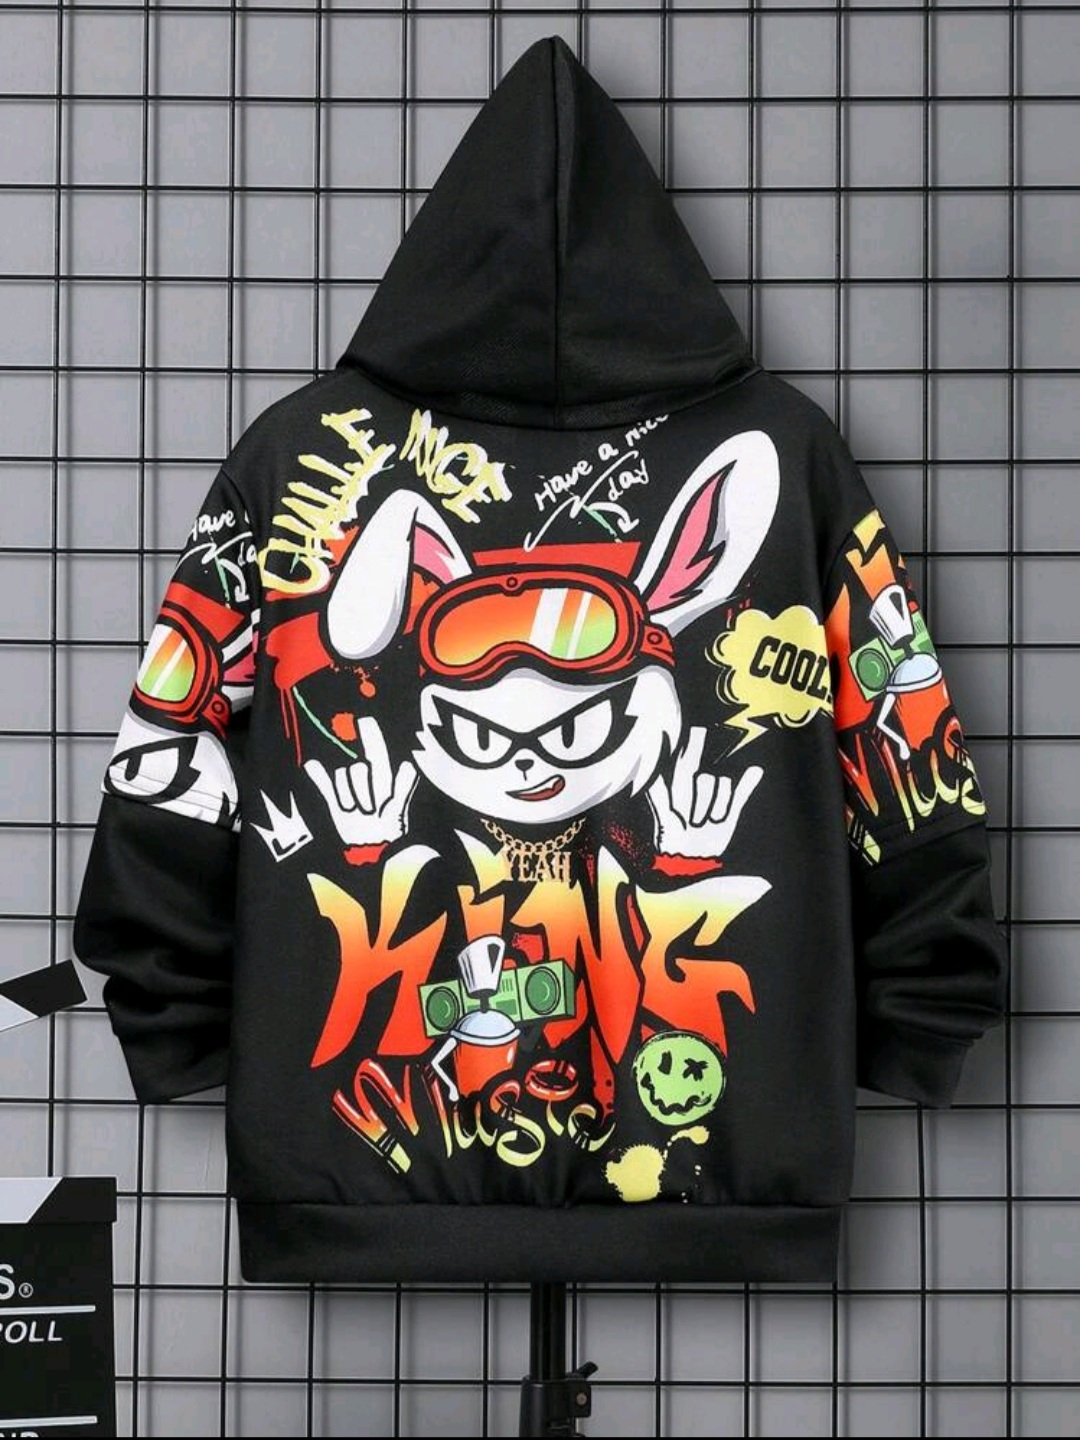 Hoodie with a graphic phrase and cartoon drawings of a boy